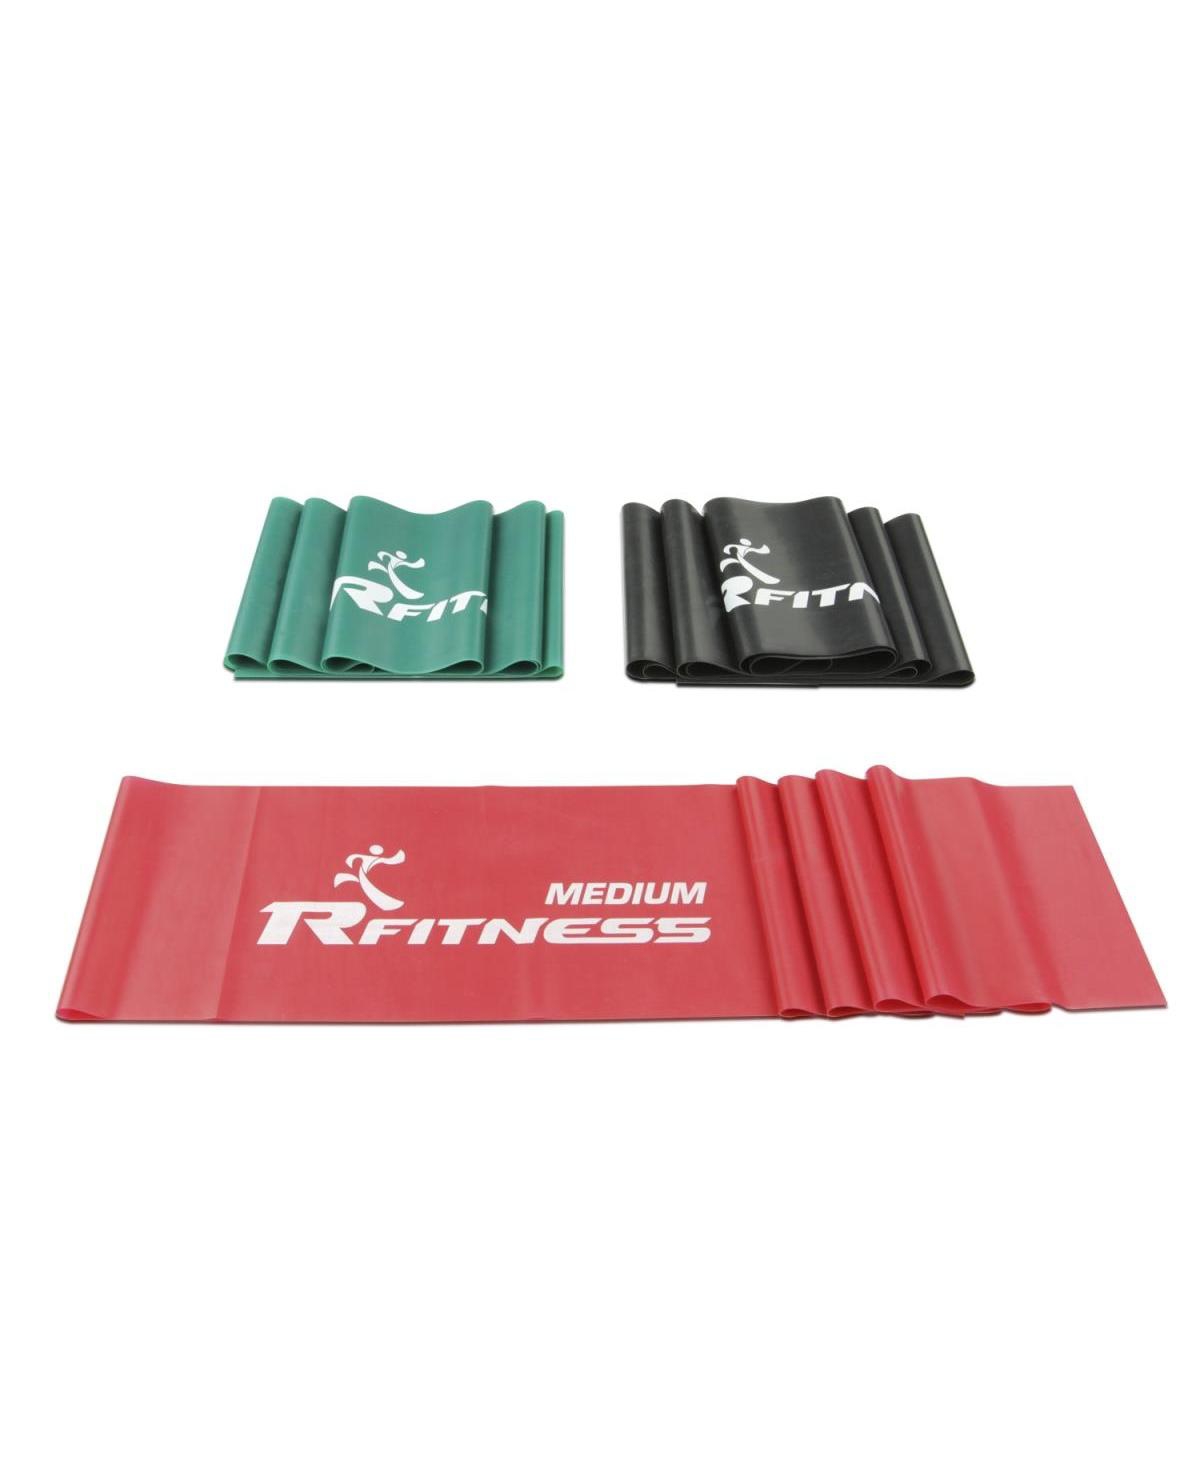 Furinno60 in. Rfitness Professional Flat Stretch Latex Exercise Band - 3 Piece - Open miscellaneous